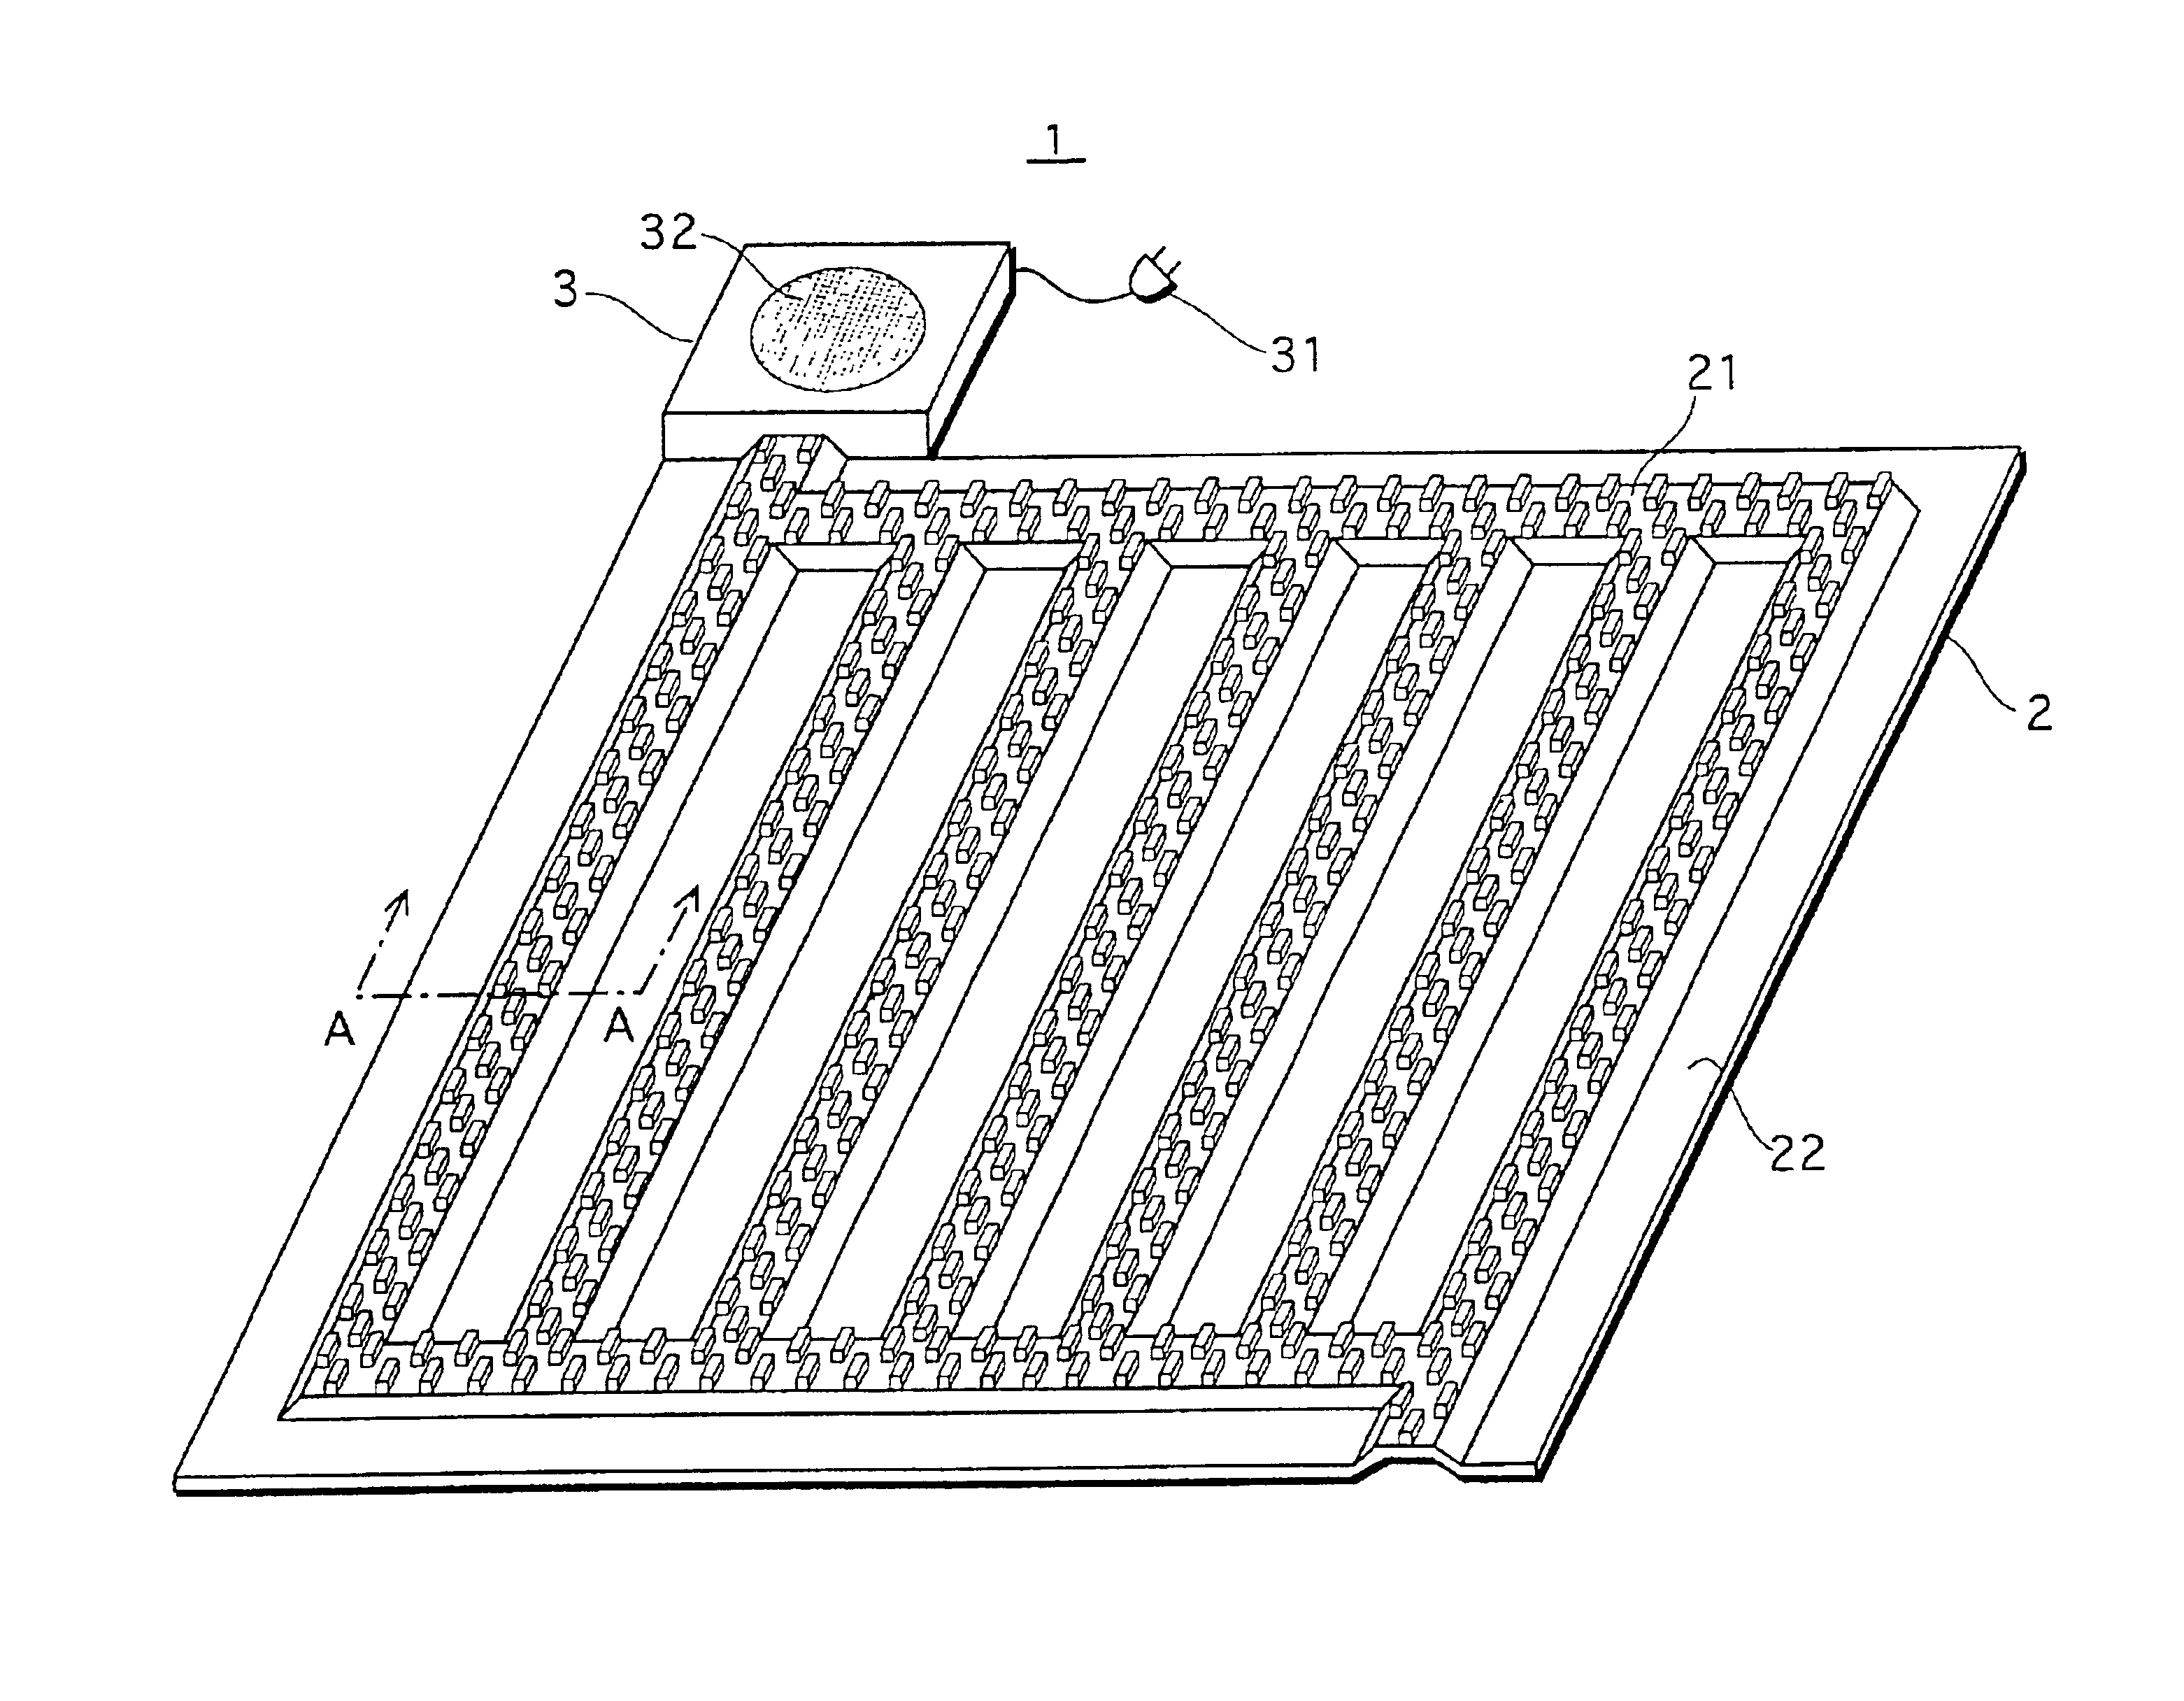 Lighting apparatus with enhanced capability of removing heat